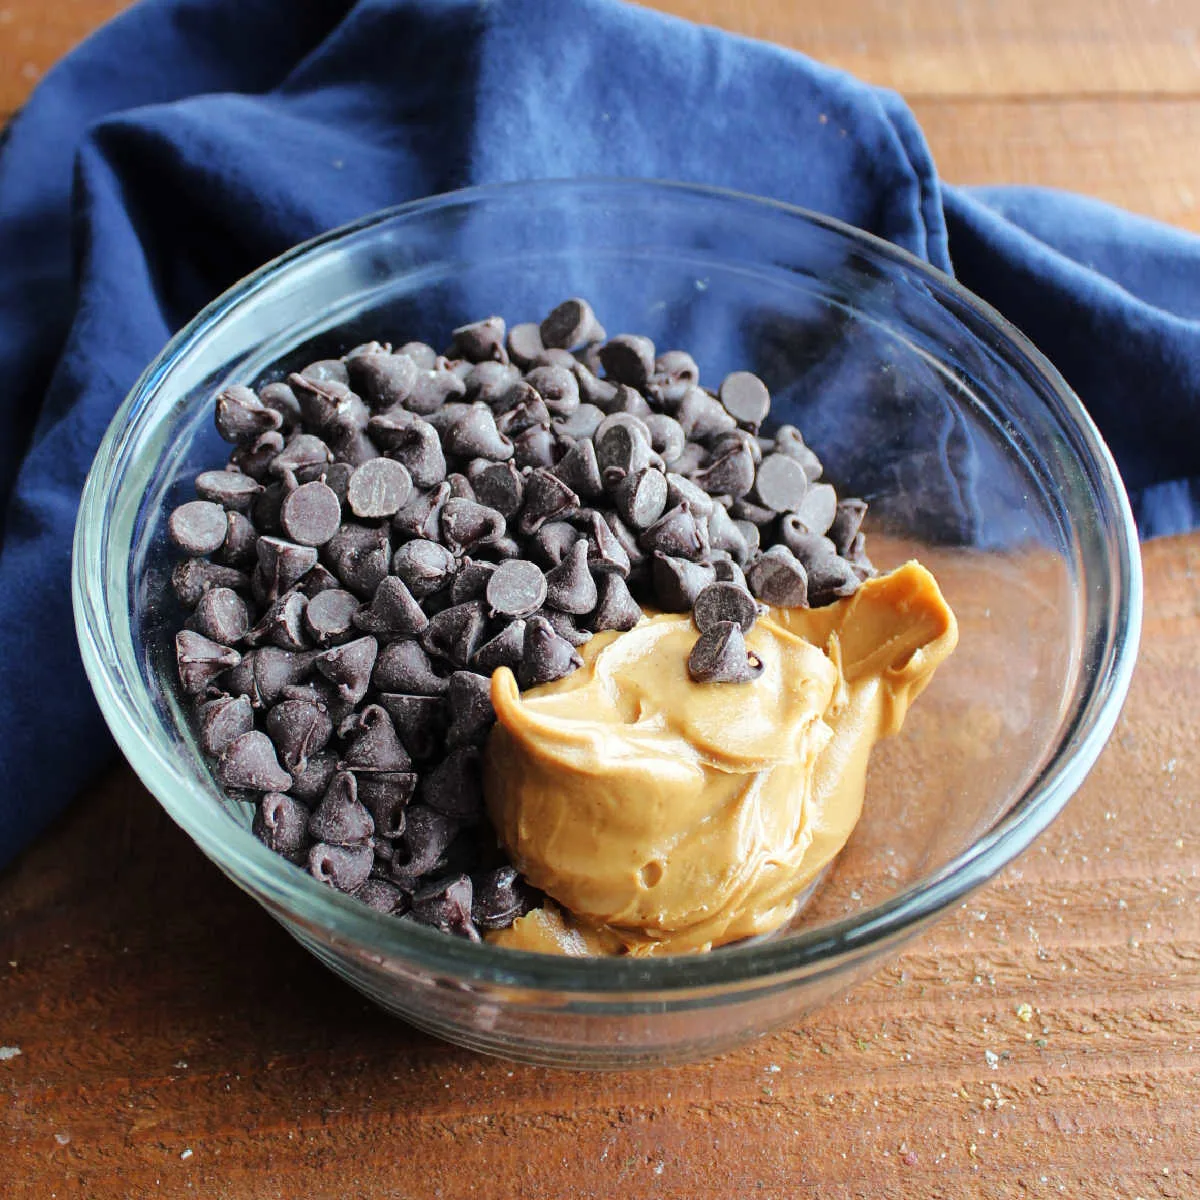 Bowl of peanut butter and chocolate chips ready to be made into topping for peanut butter bars.